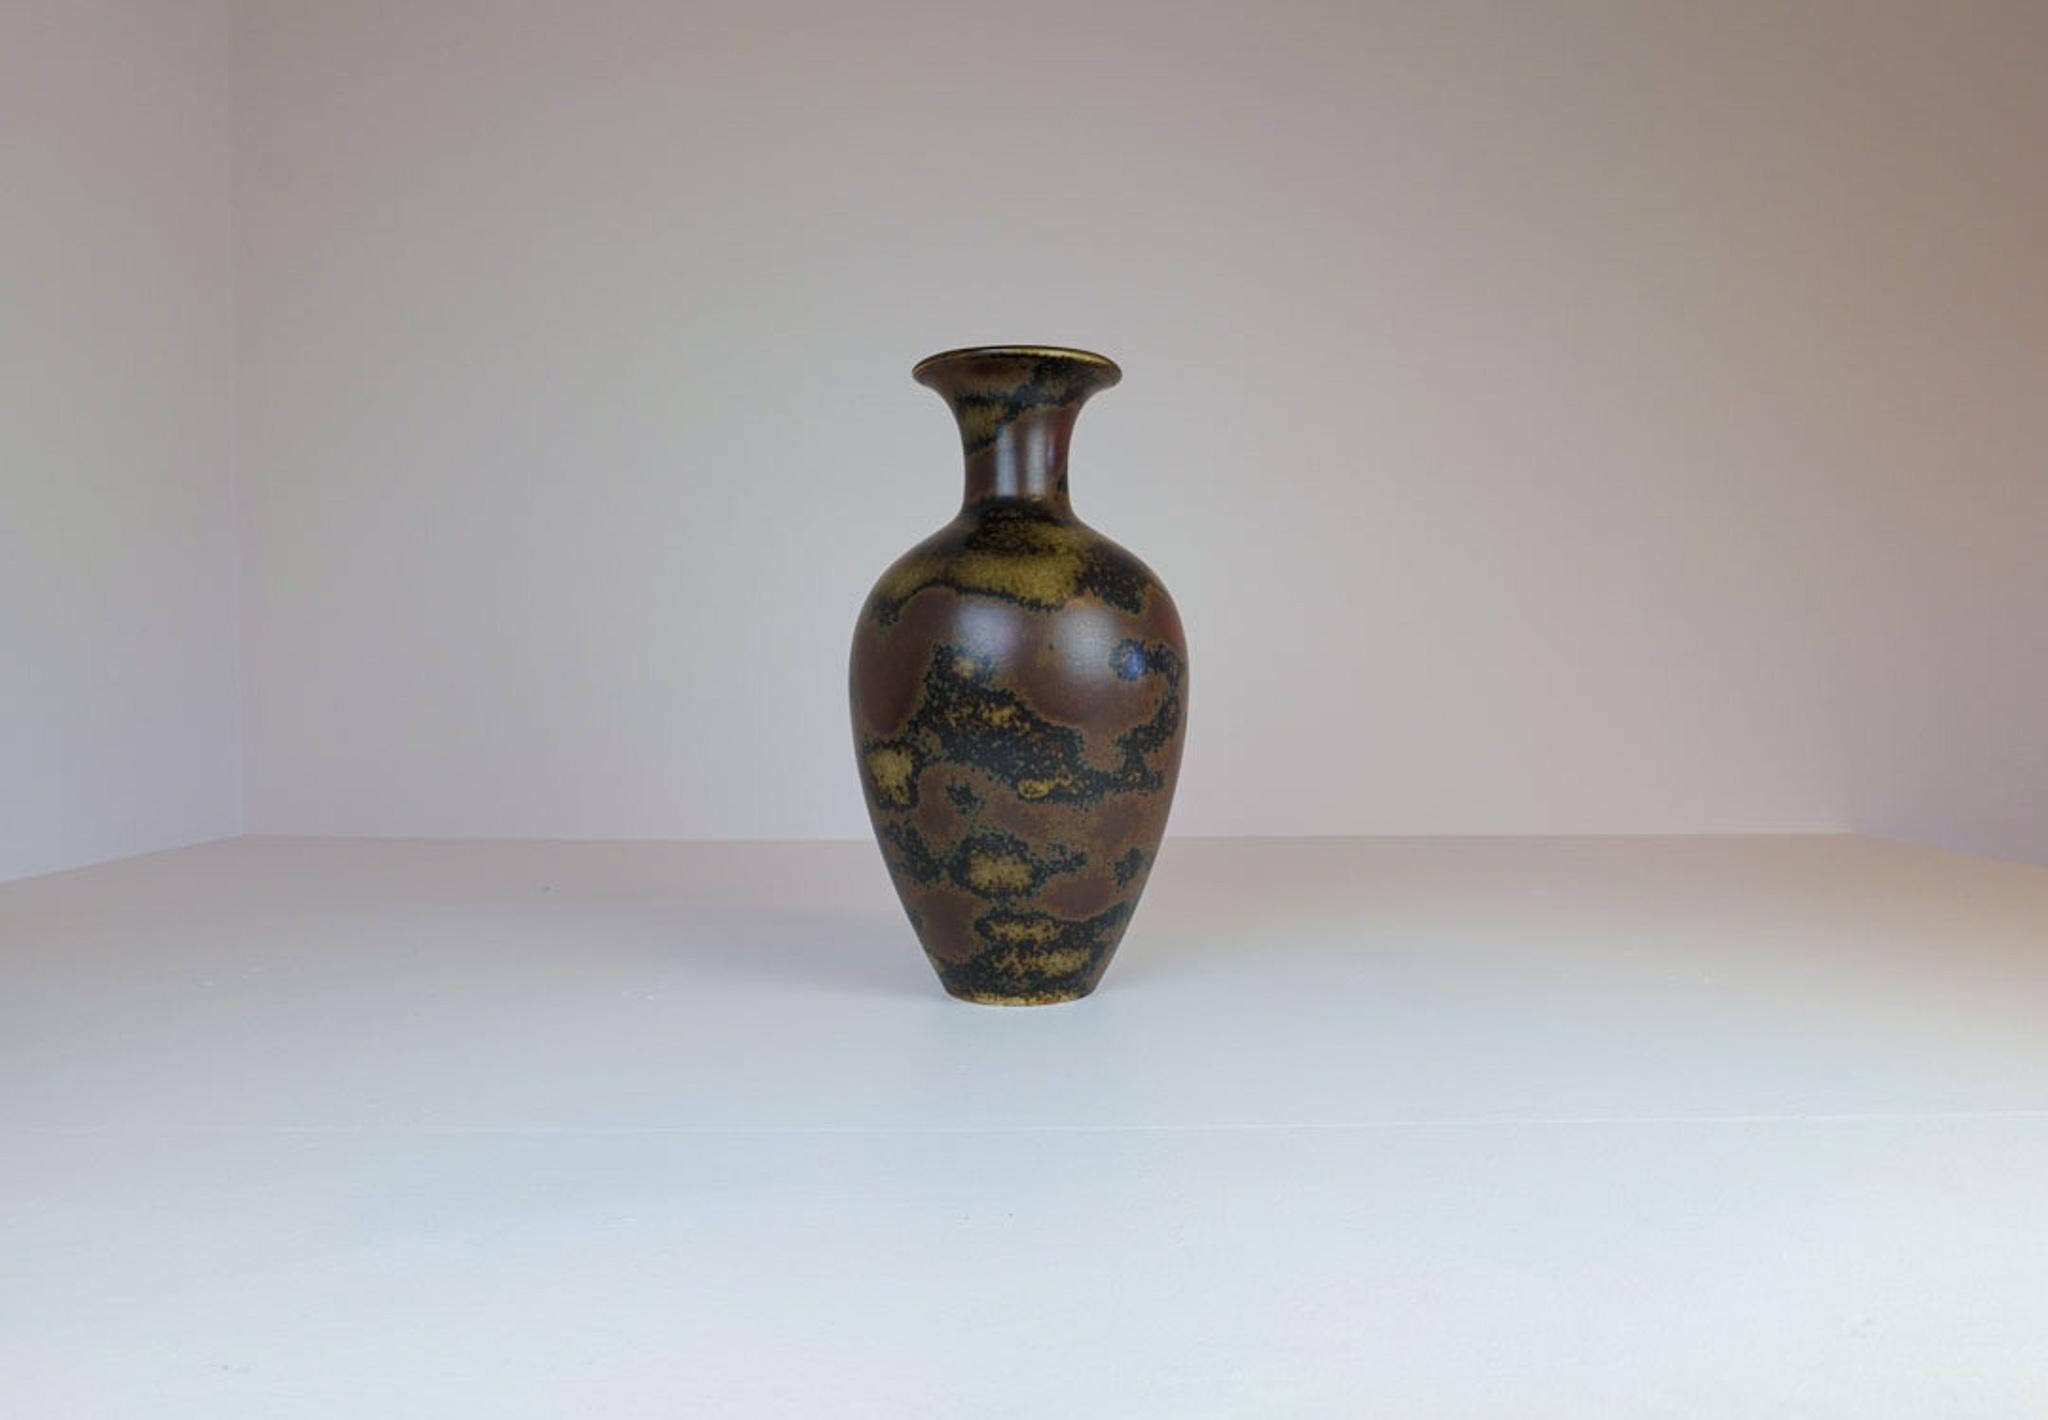 A gorgeous floor vase produced at Rörstrand and designed by maker/Designer Gunnar Nylund. Made in Sweden in the midcentury. Beautiful brown glazed in shifting dark camouflage colors. Rare seen item with this color. 

Good vintage